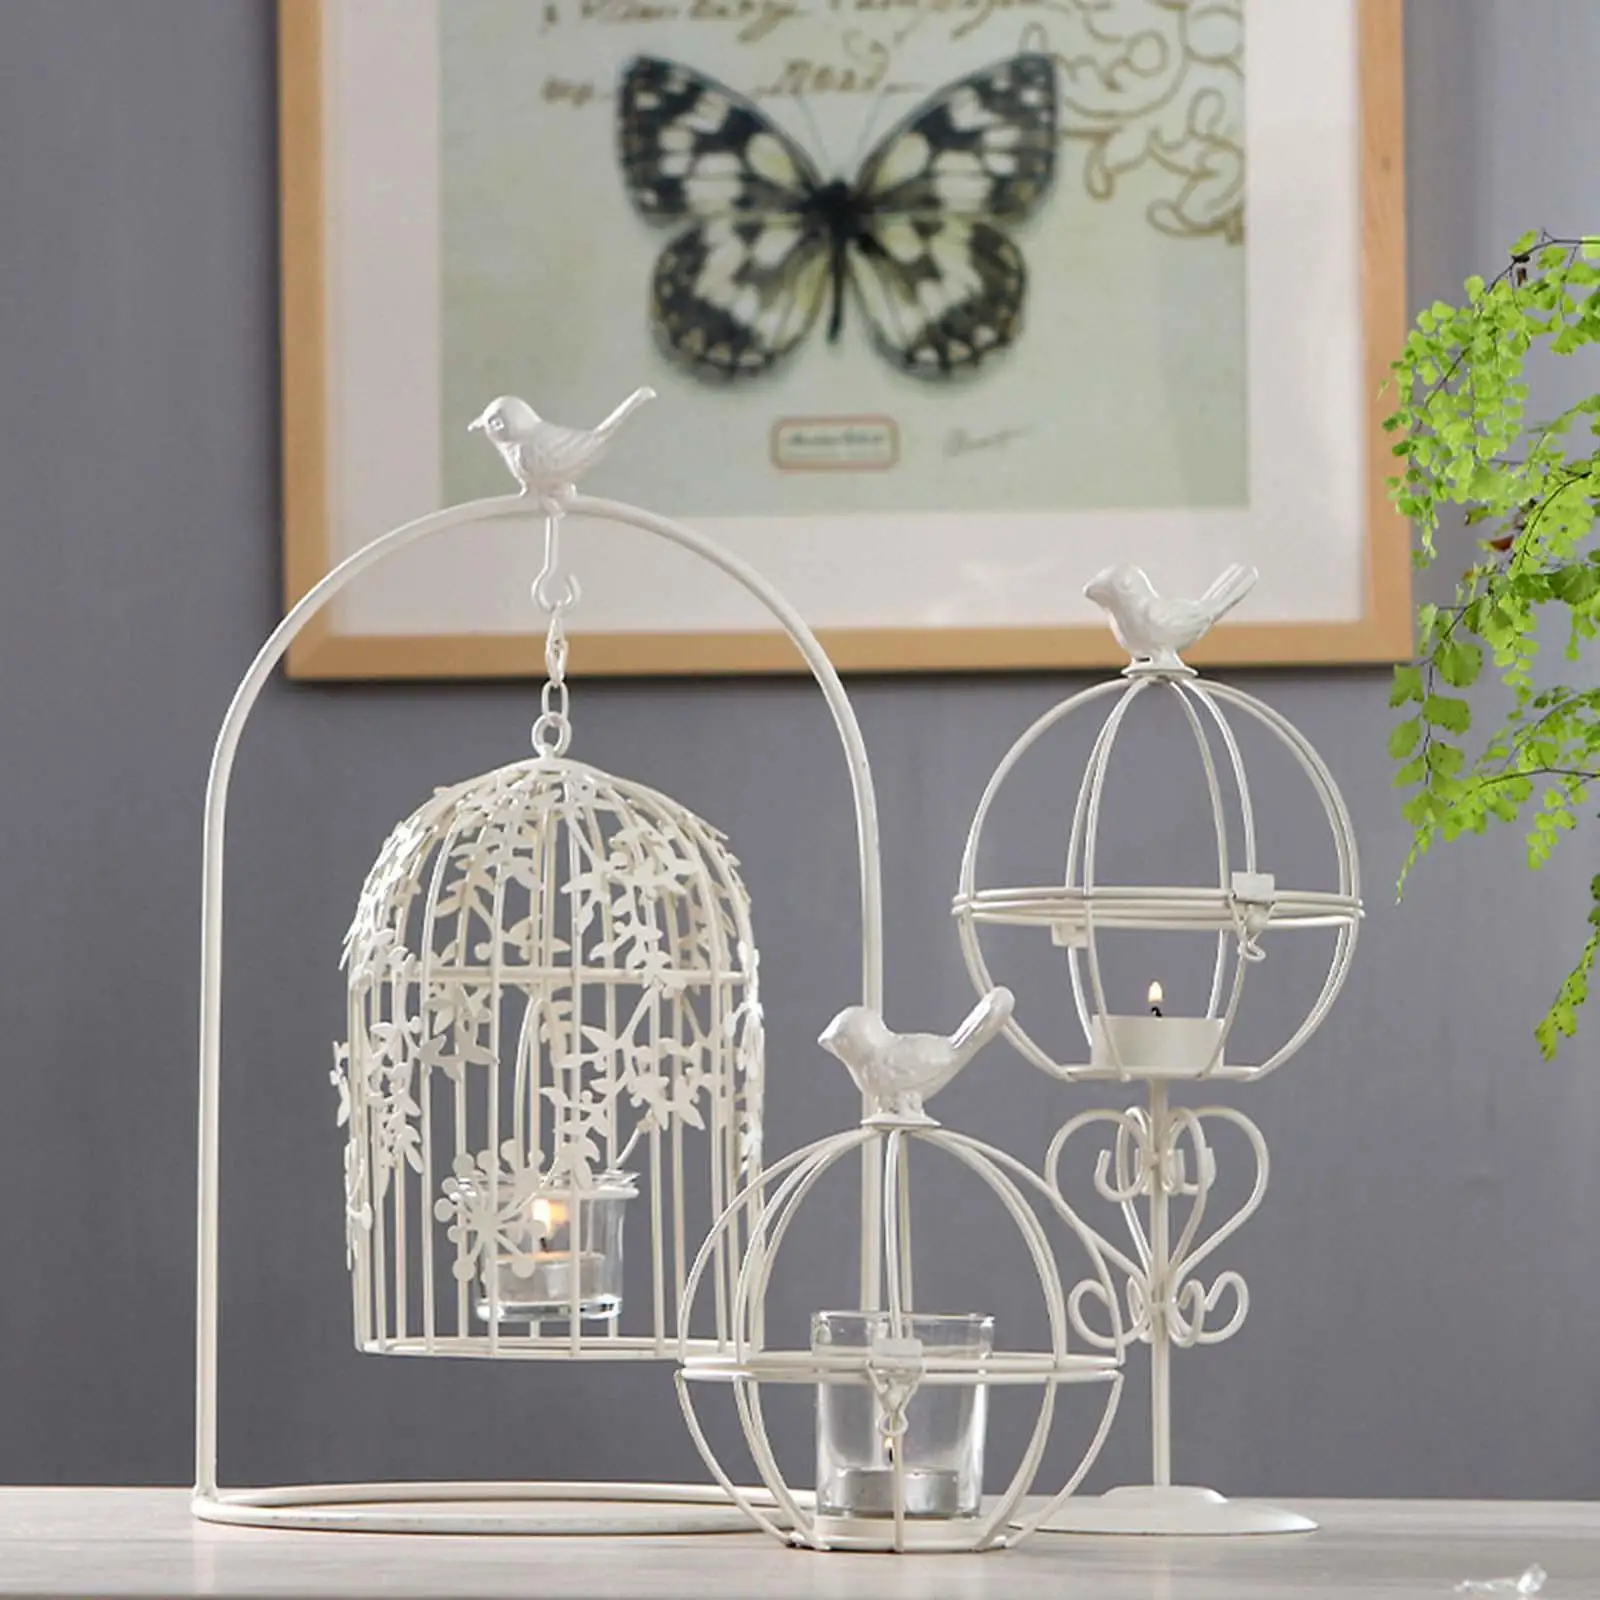 Tea Light Candle Holder Birdcage Candle Holder Dining Table Centerpiece Decoration for Living Room Wedding Birthday Gift